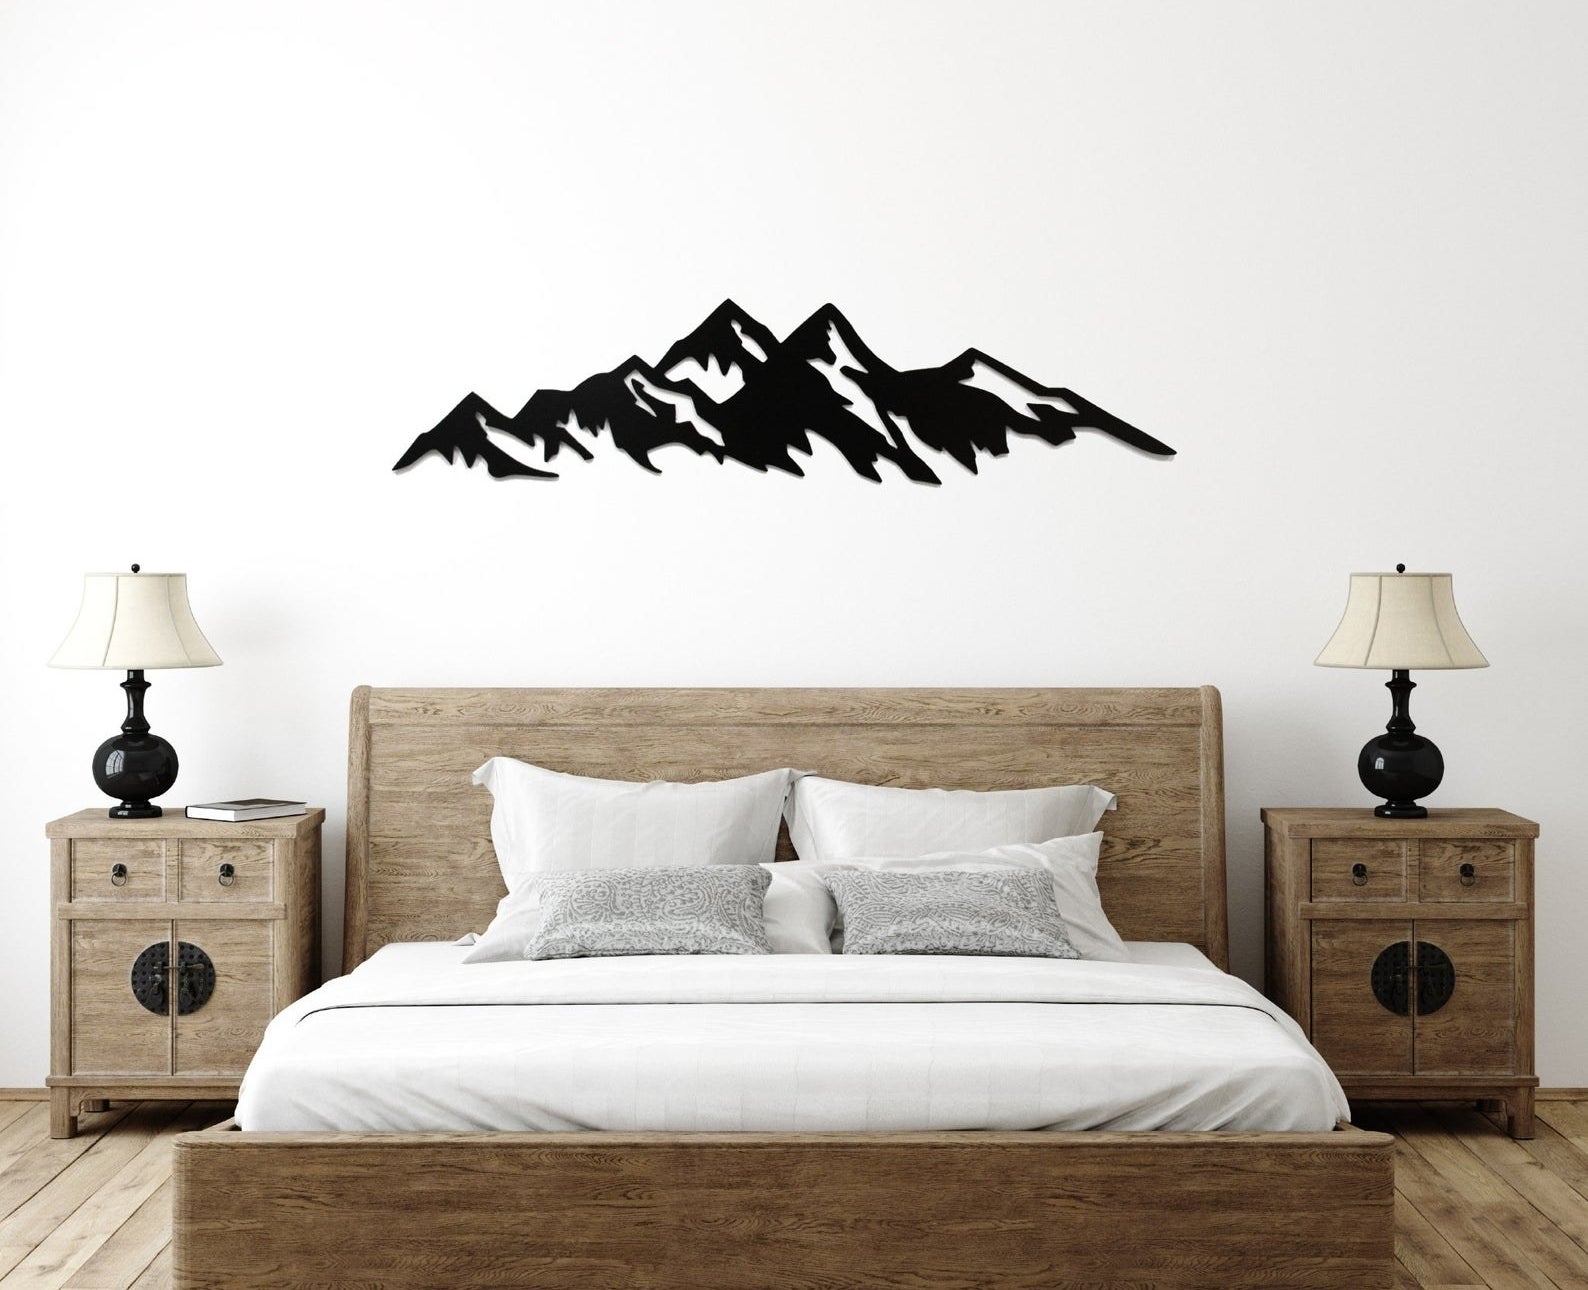 A minimalist black metal mountain range installed above a bed 